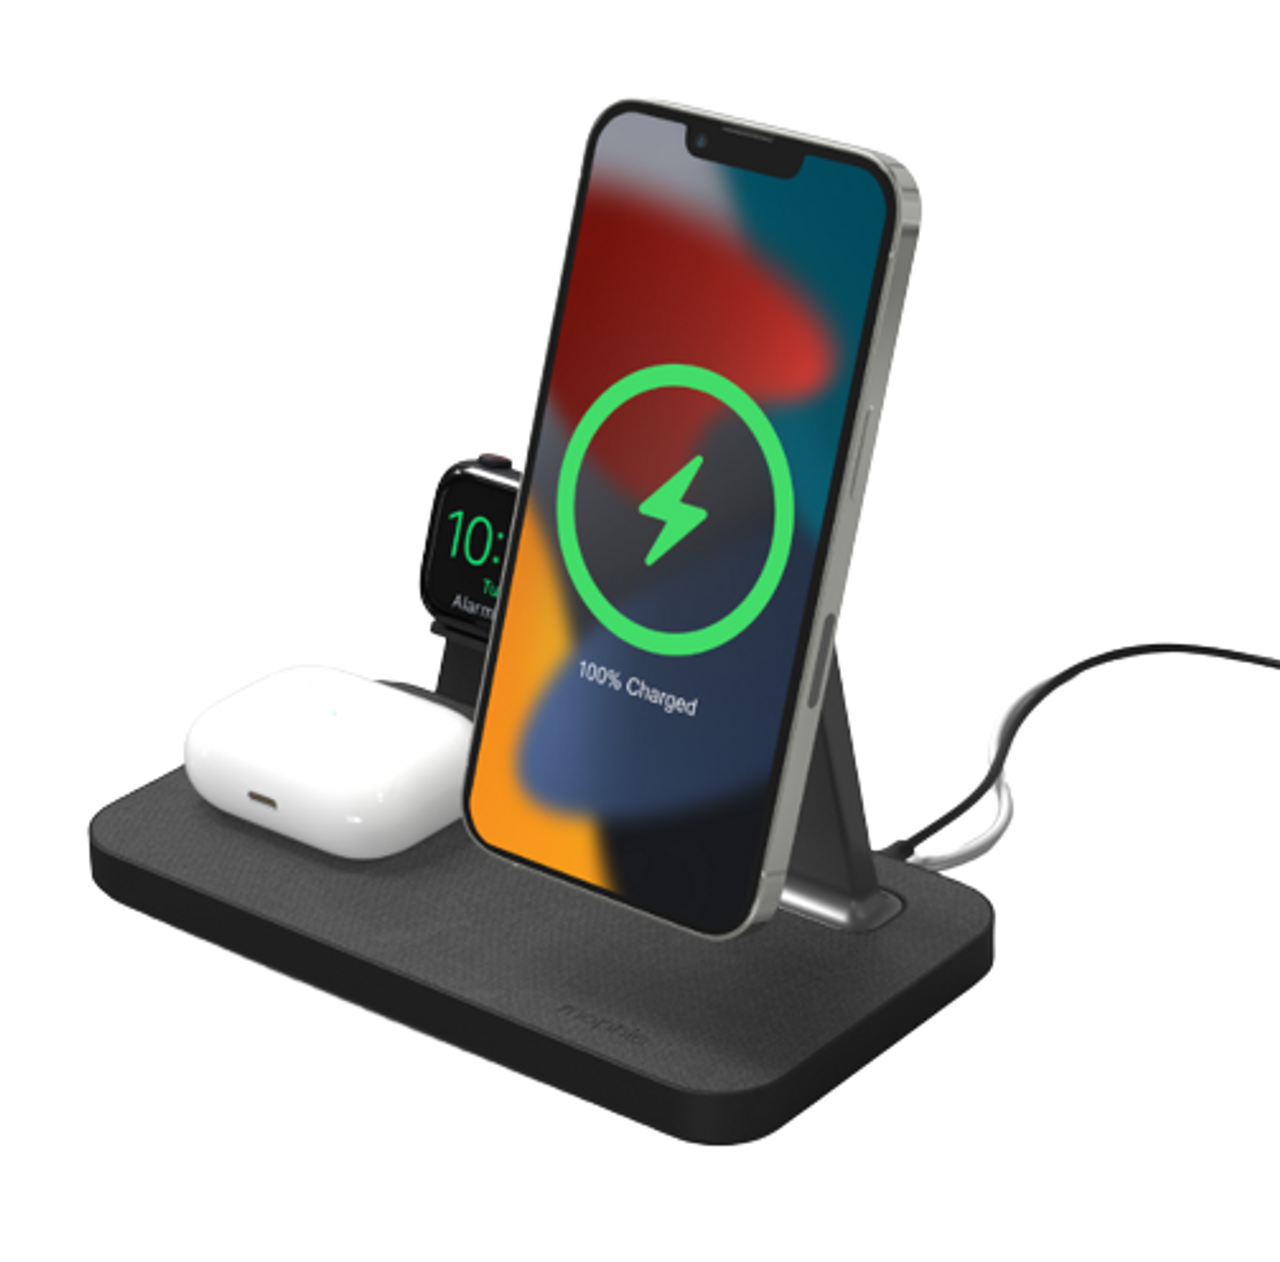 3 in 1 Wireless Charger  Apple Charging Station for iPhone, Apple